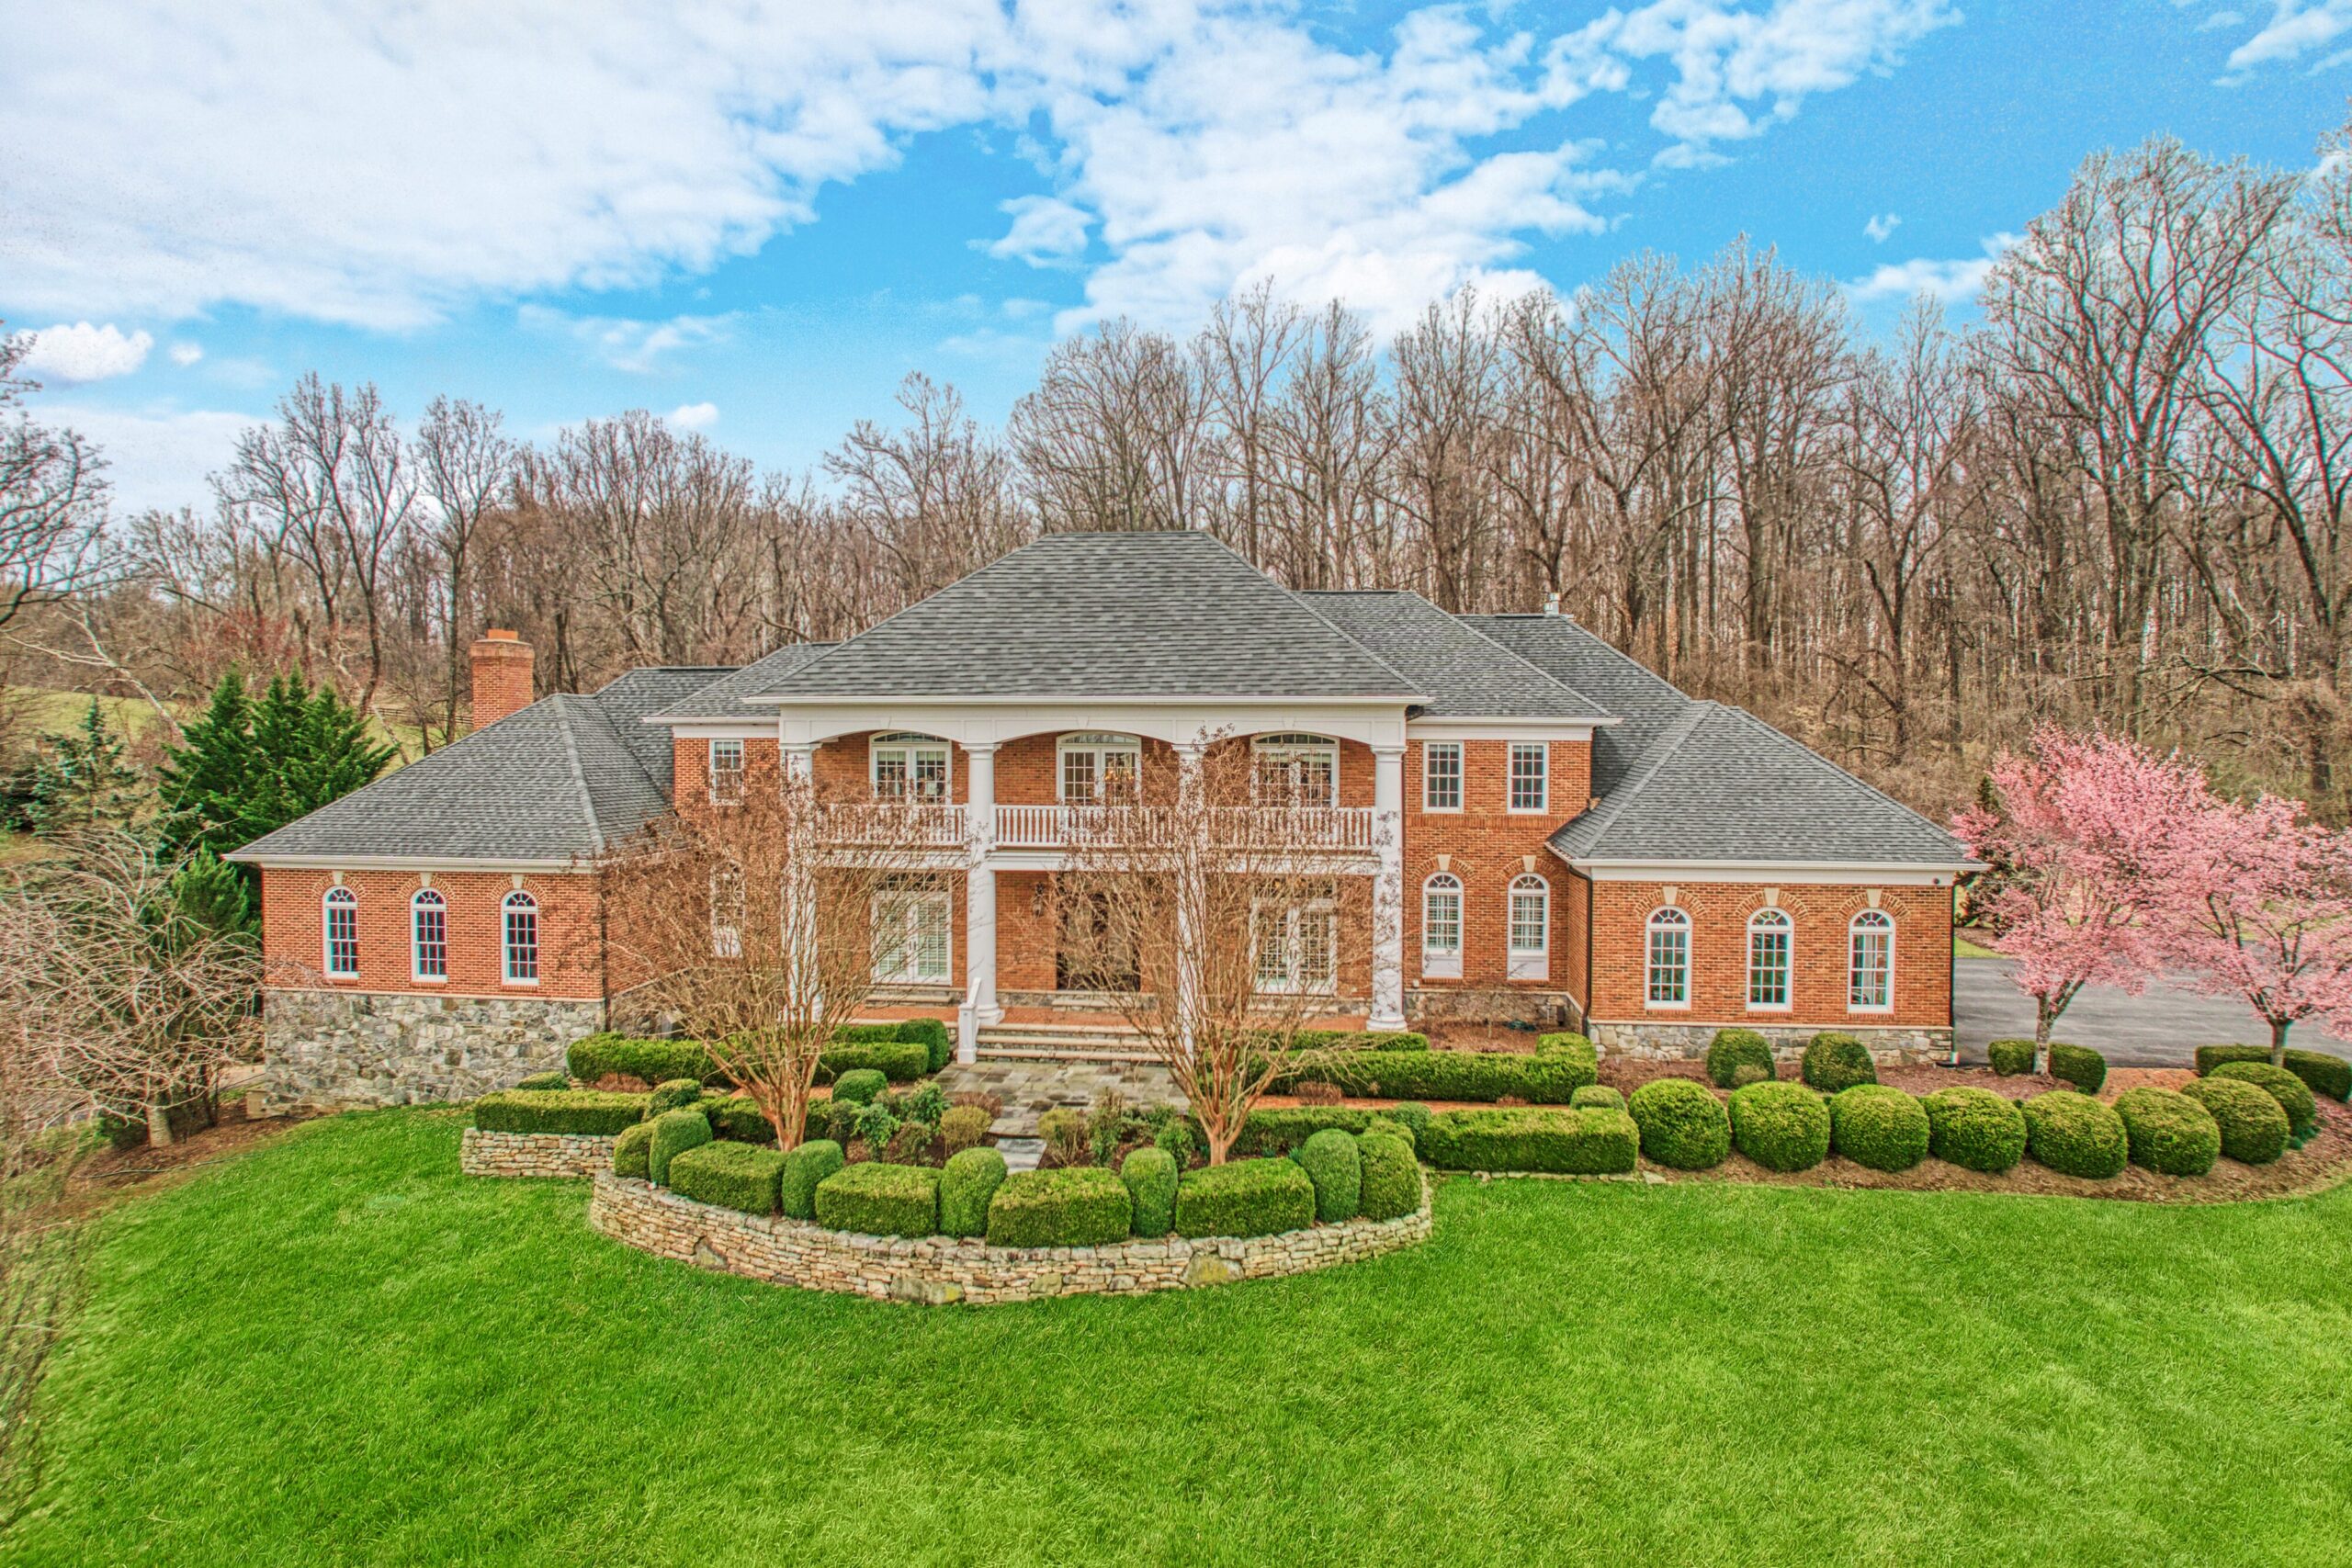 Exterior professional photo of 40573 Spectacular Bid Place - showing the front brick facade of the Georgian-style manor home taken from an drone